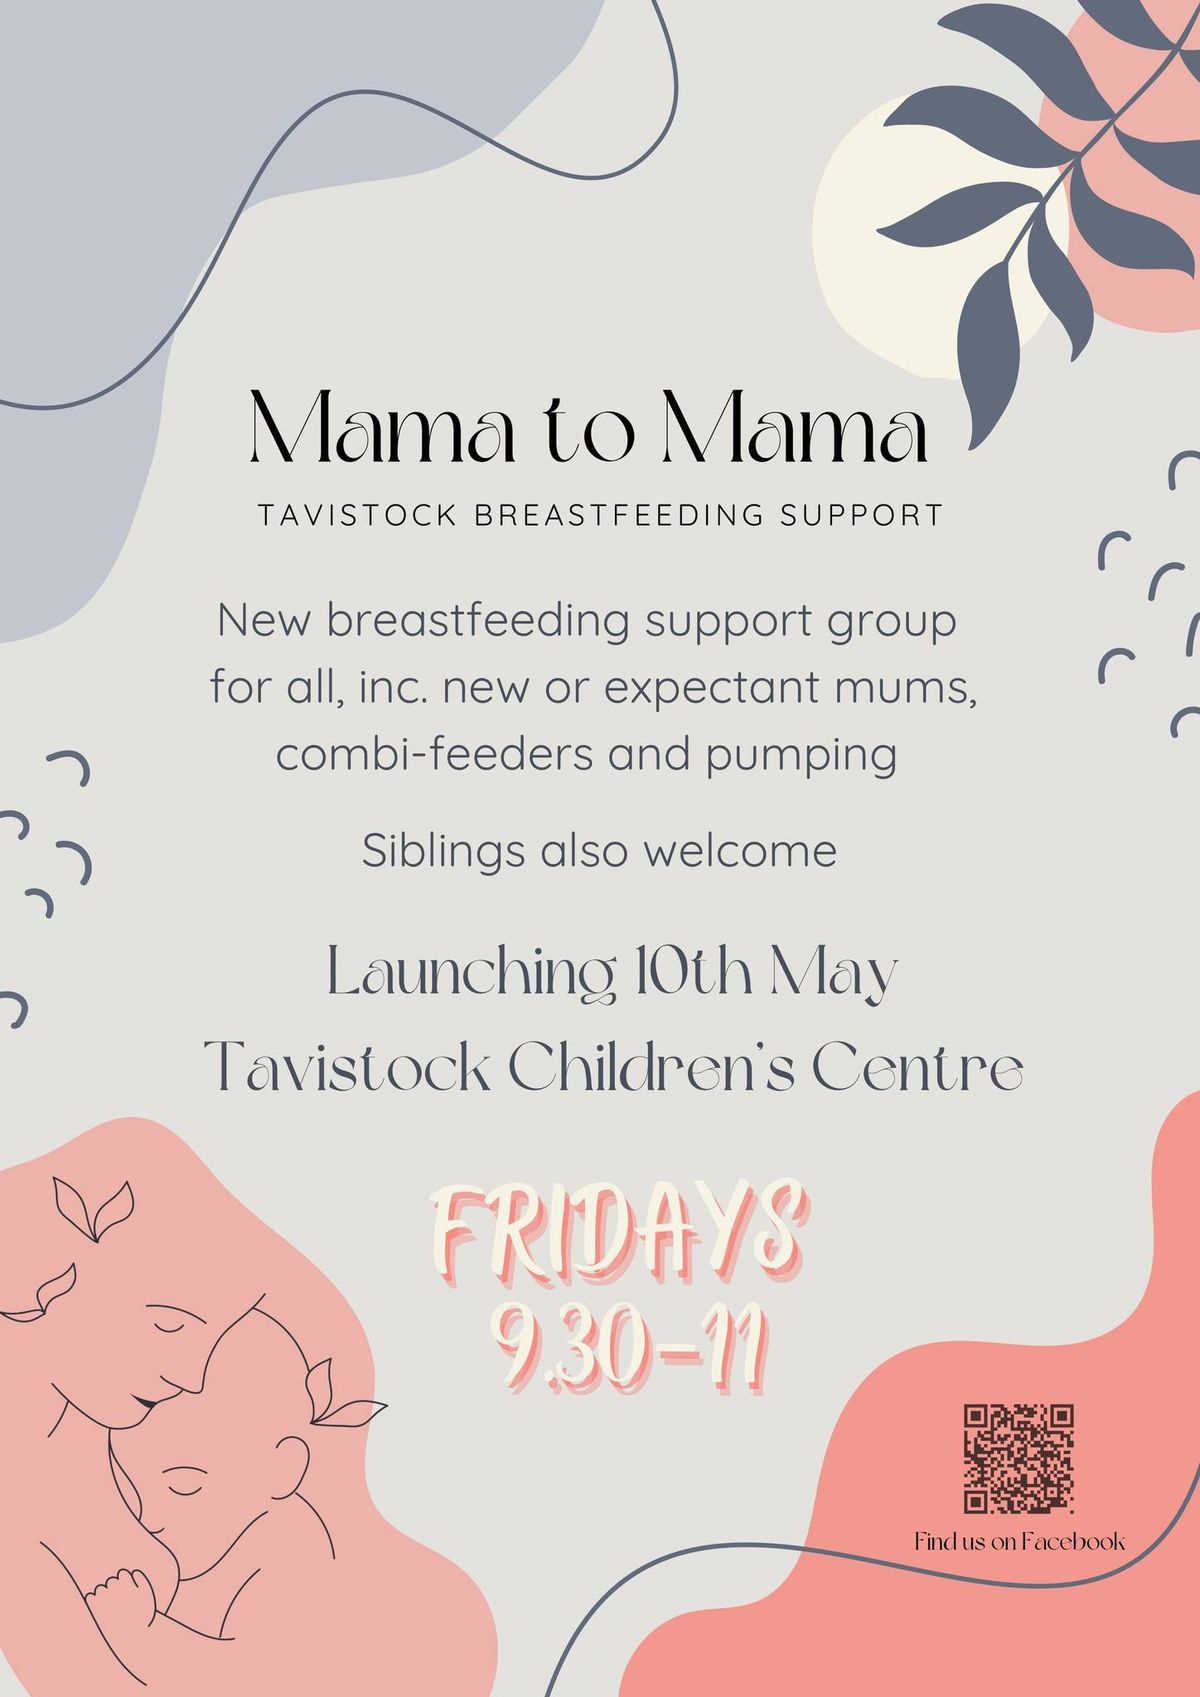 Mama to Mama Breastfeeding Support Group Launch